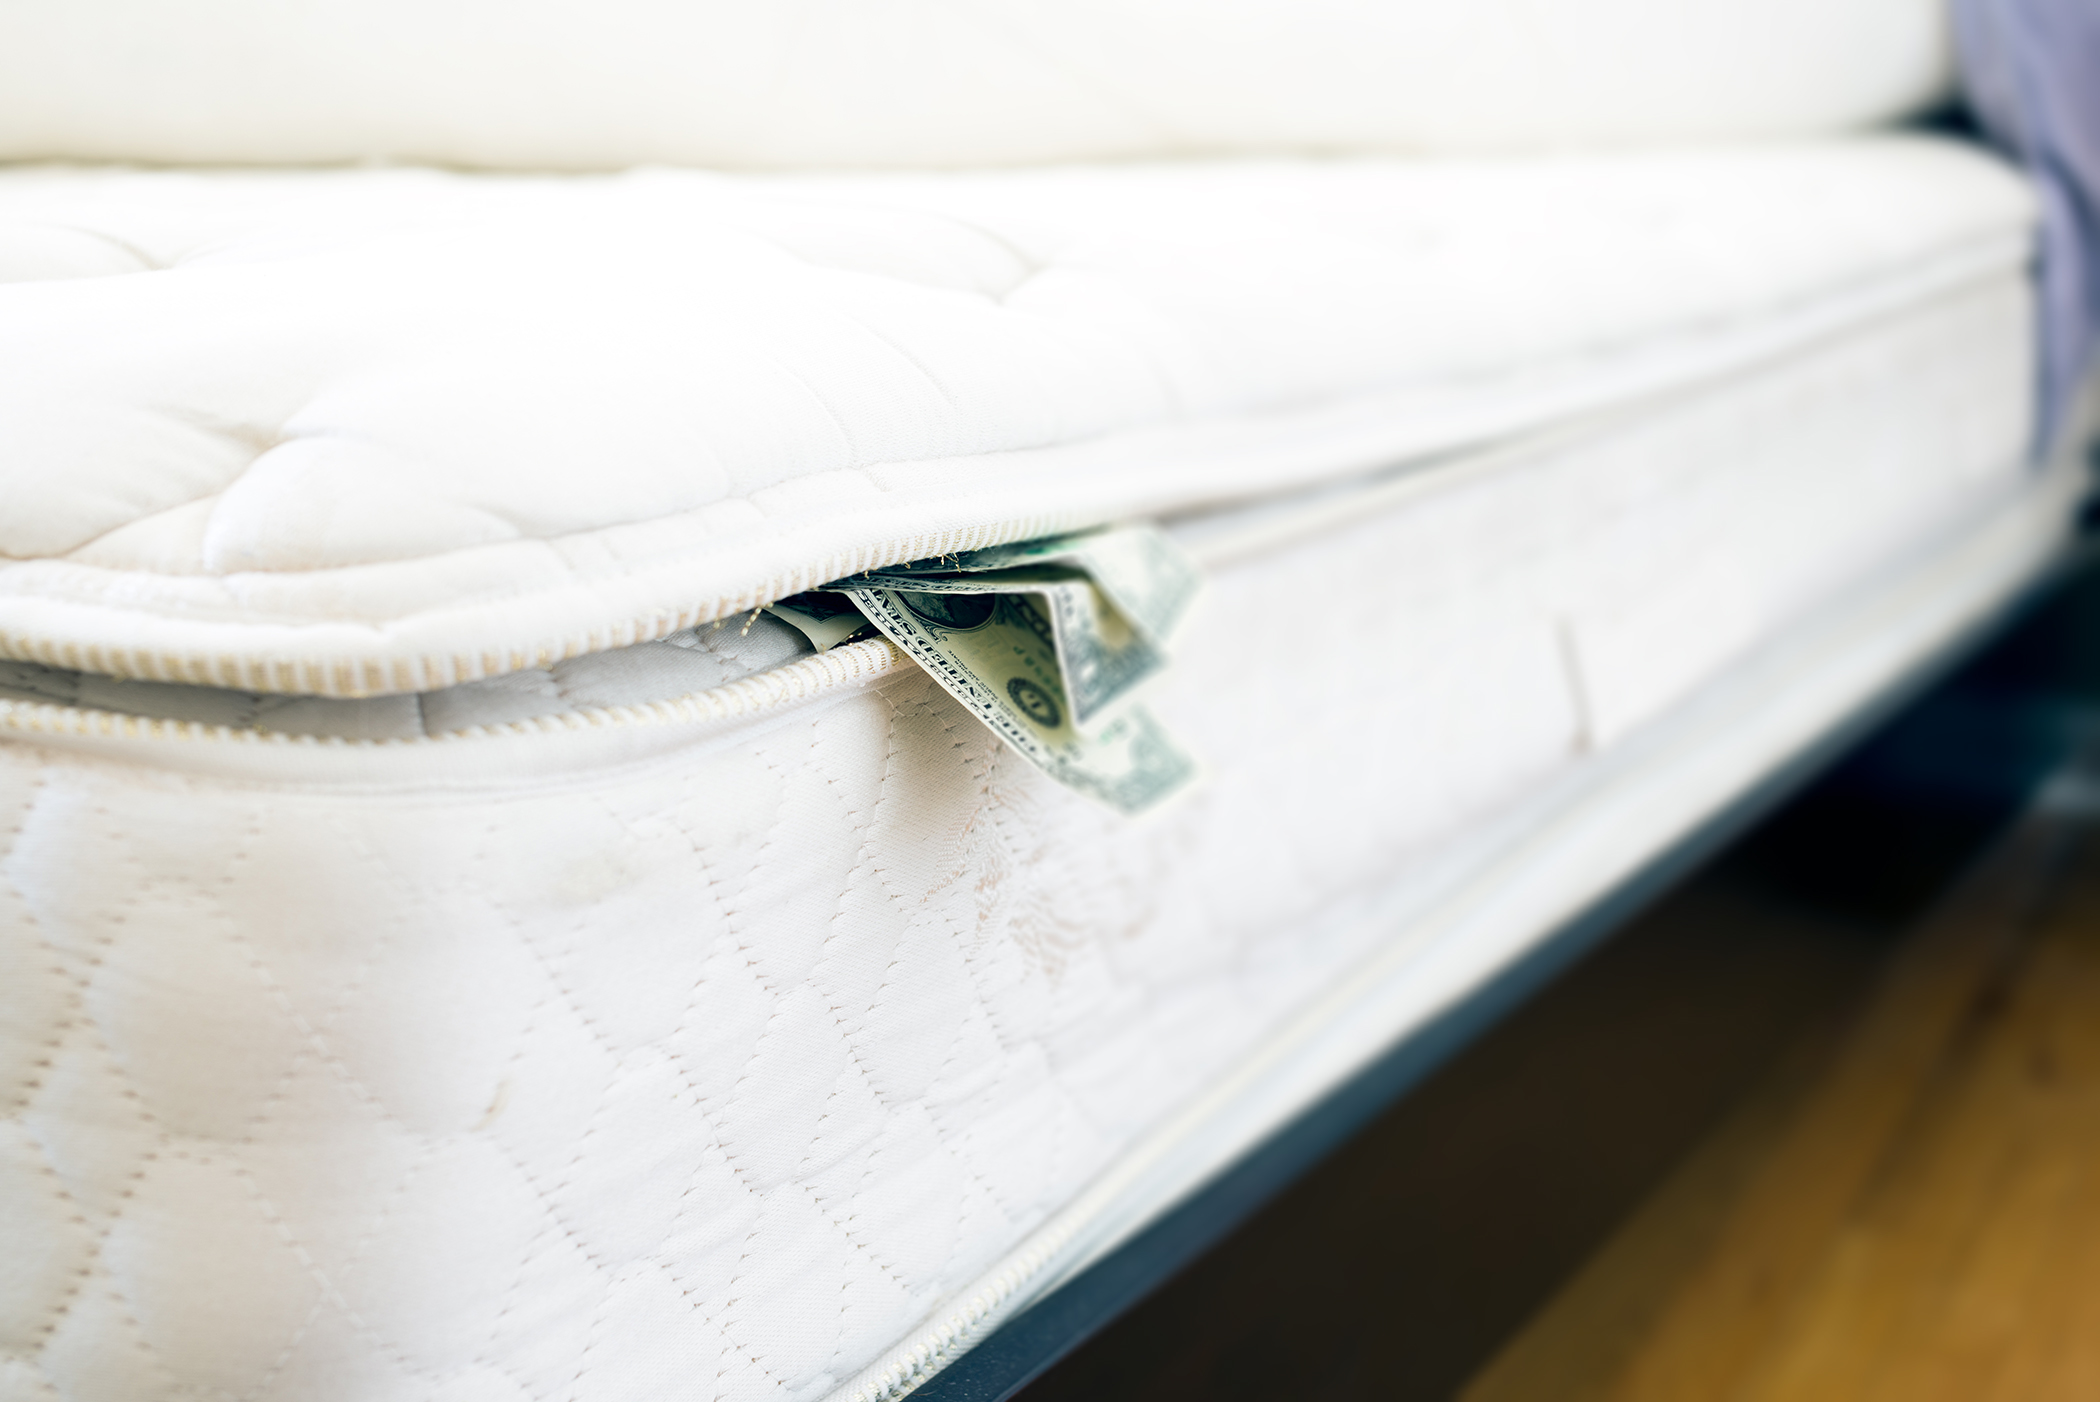 Here's What $20 Million Stashed Inside a Mattress Looks Like